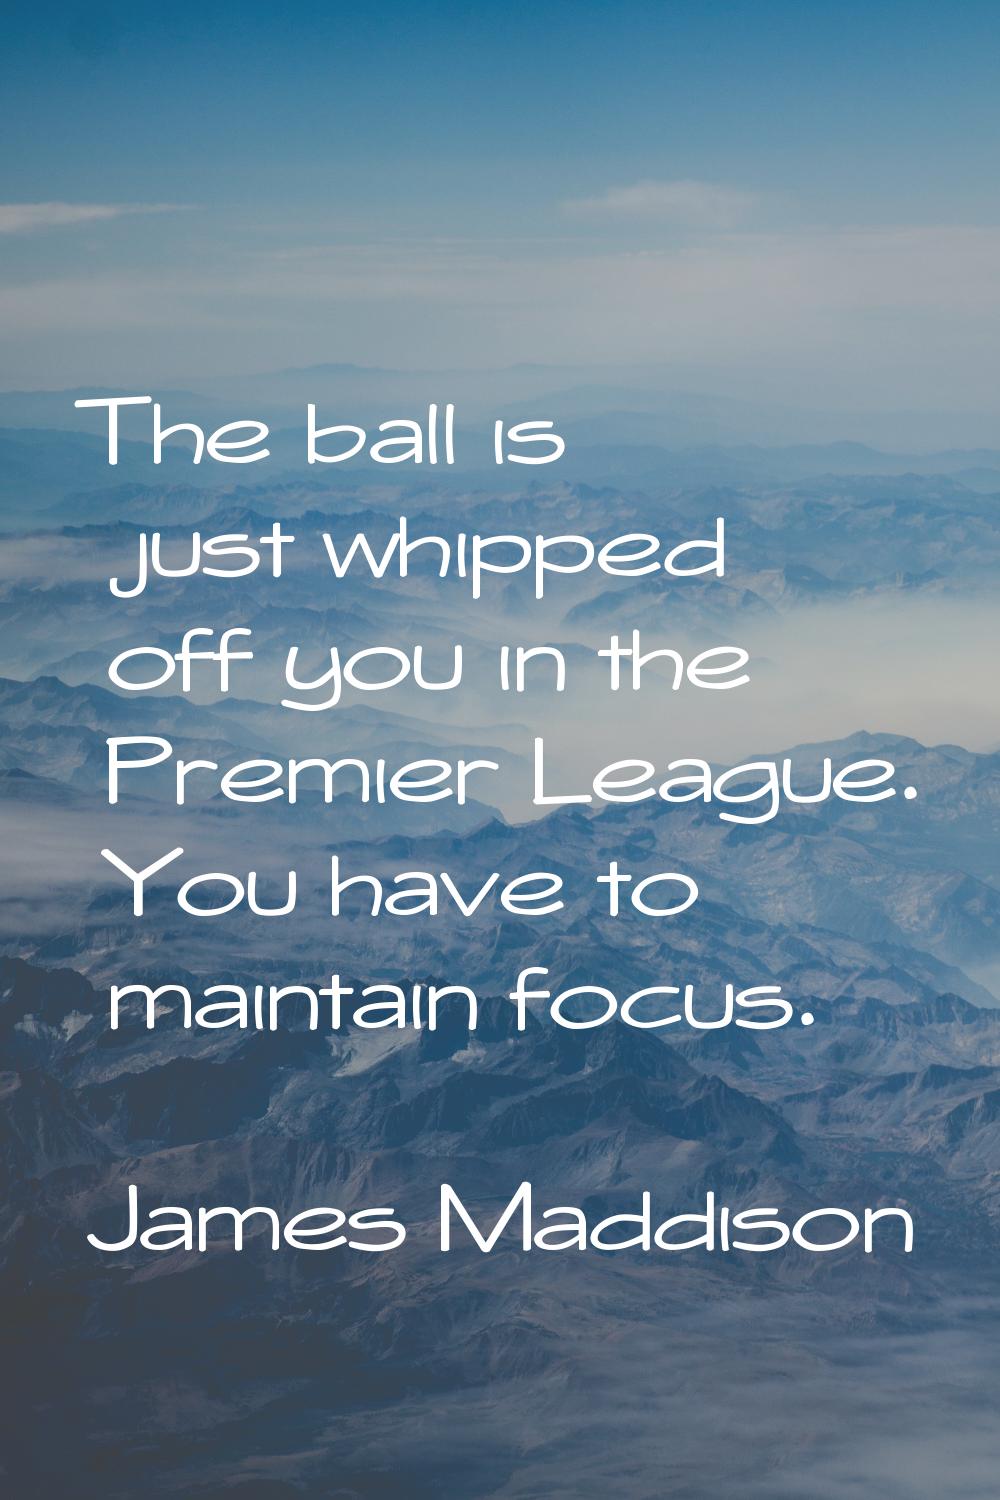 The ball is just whipped off you in the Premier League. You have to maintain focus.